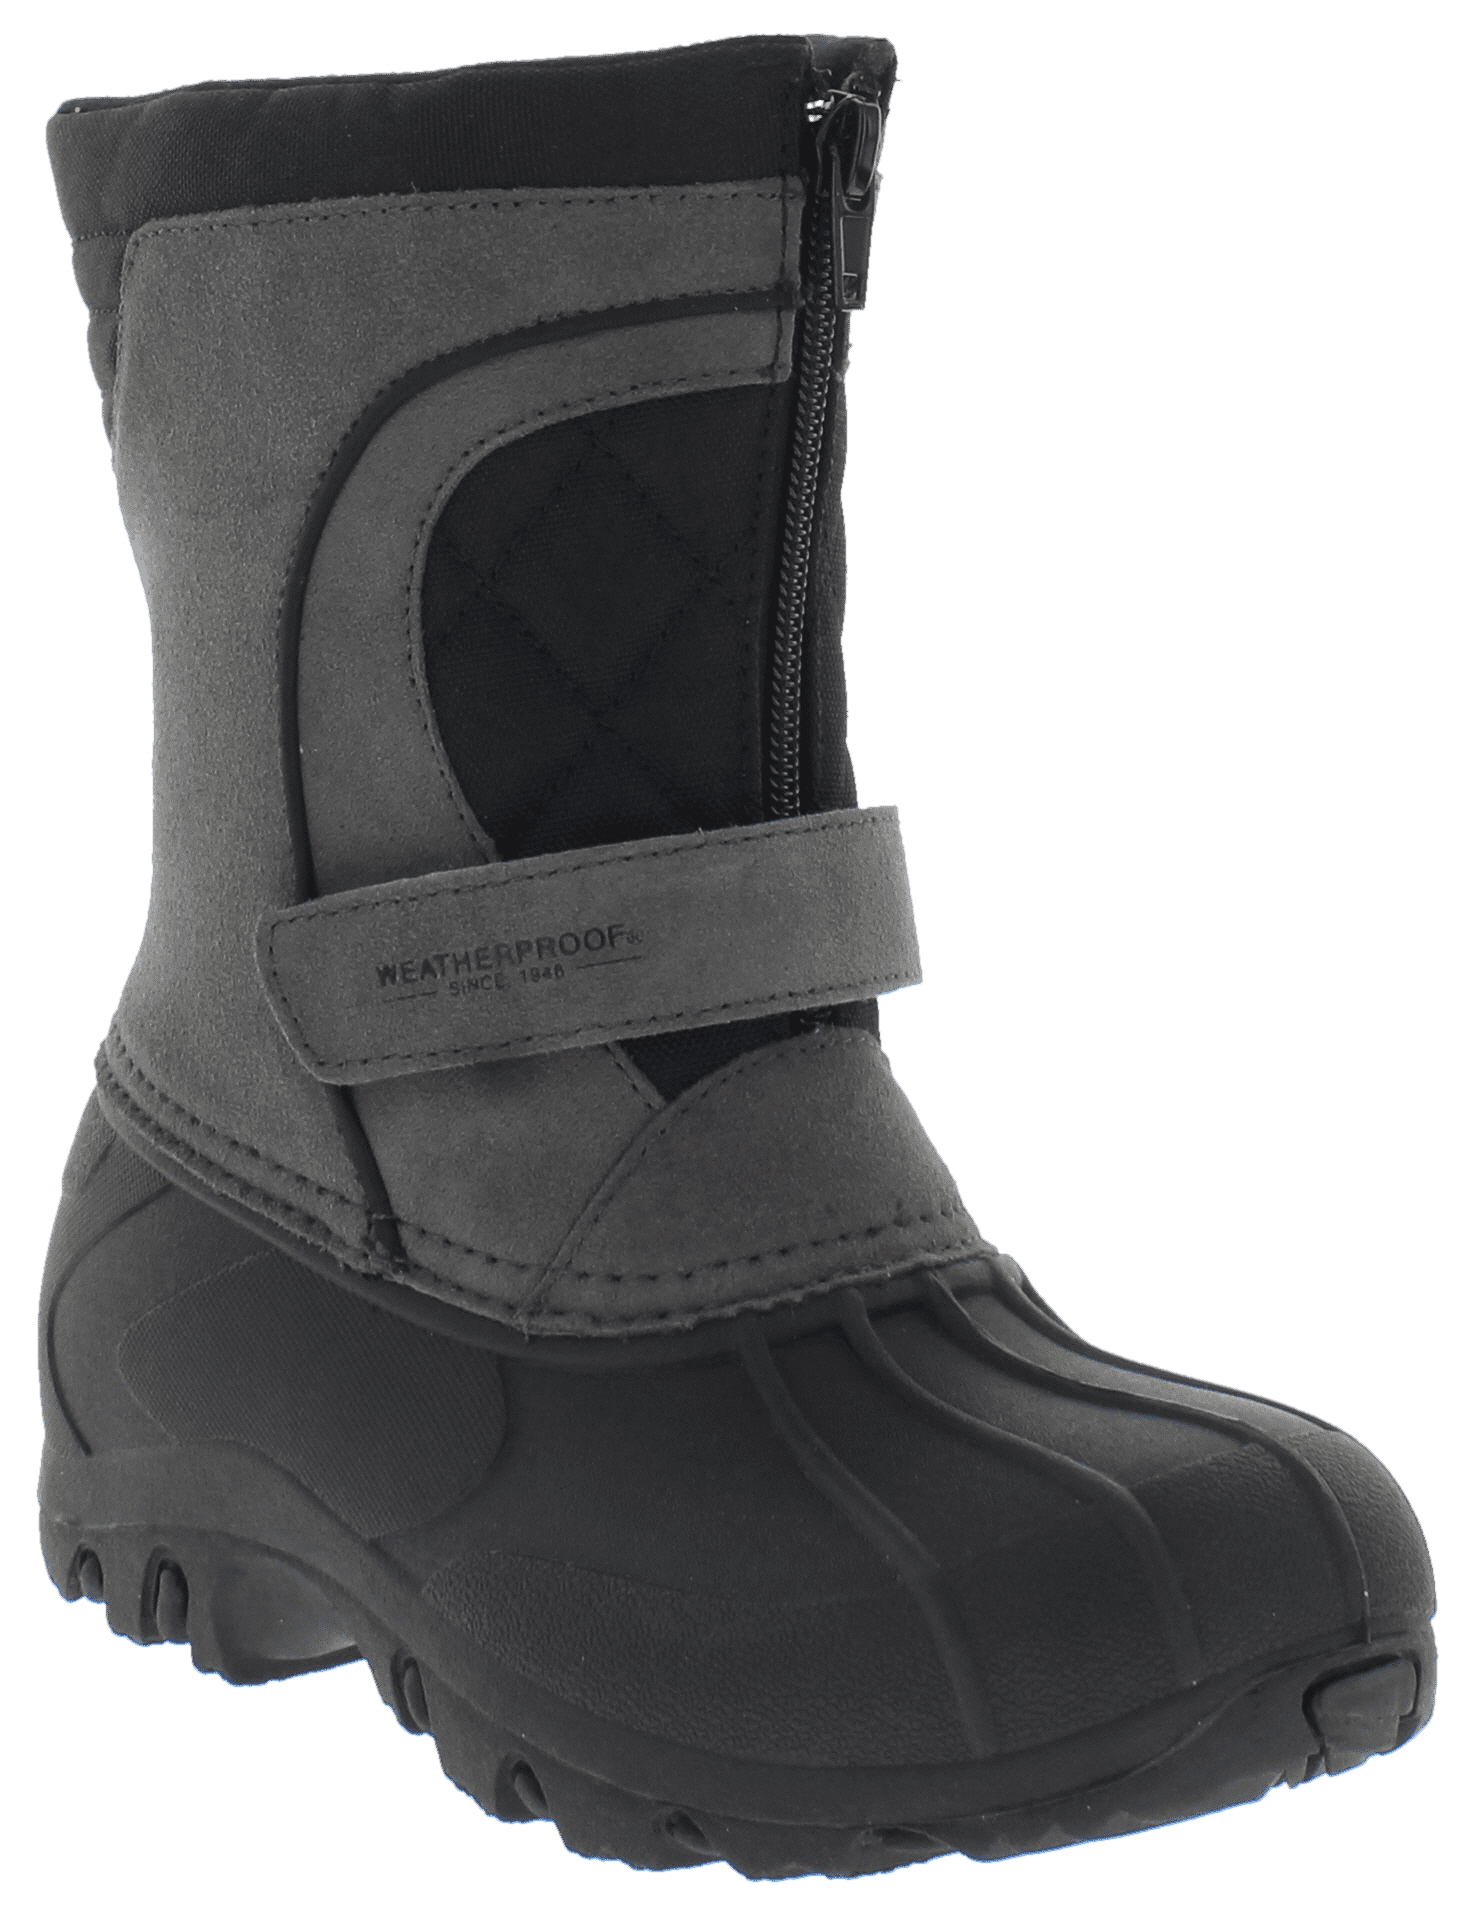 Keeps Feet Warm & Dry WEATHERPROOF Kids Snow Boots with Dual Closure 130814 All-Weather Insulated Winter Boots Built for Comfort Durability 